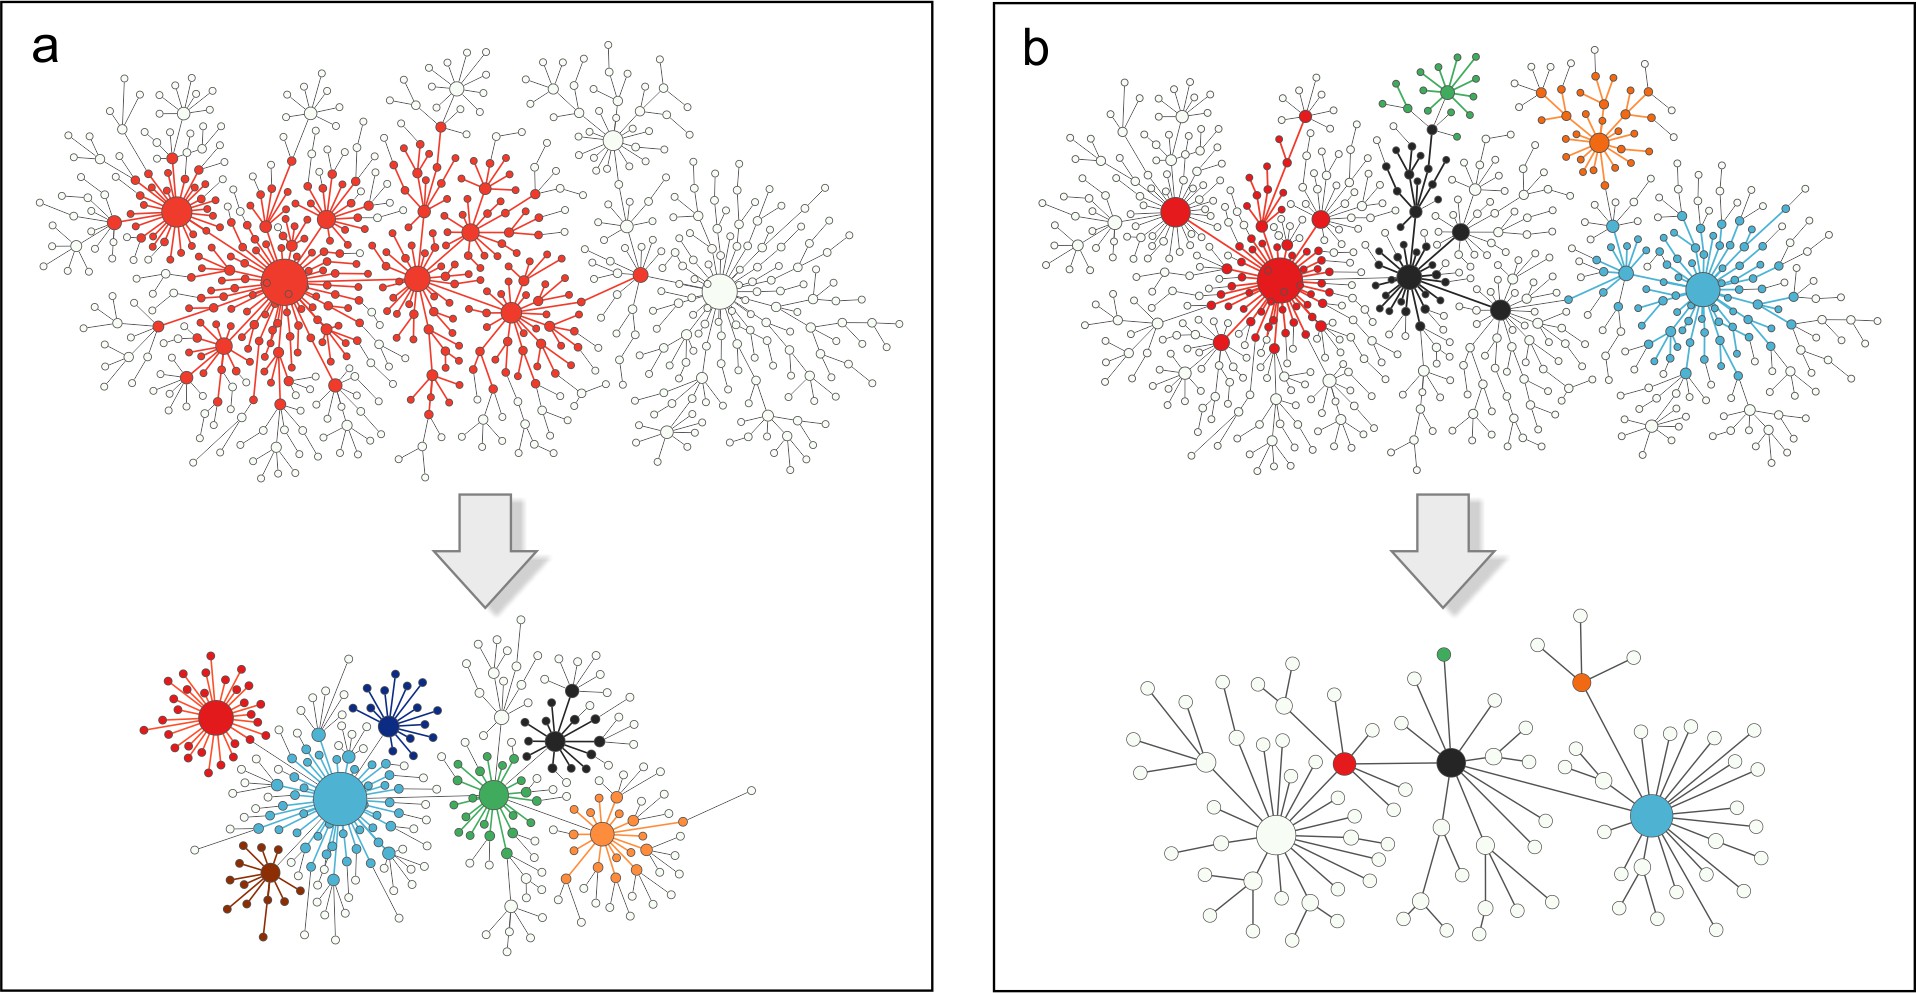 Scaling theory of fractal complex networks